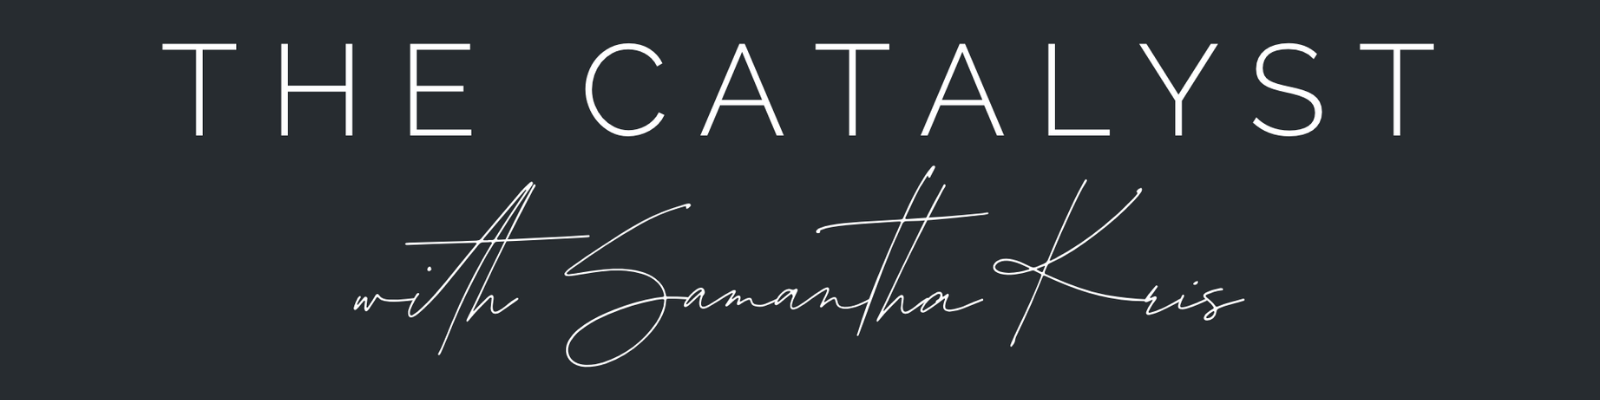 The Catalyst with Samantha Kris